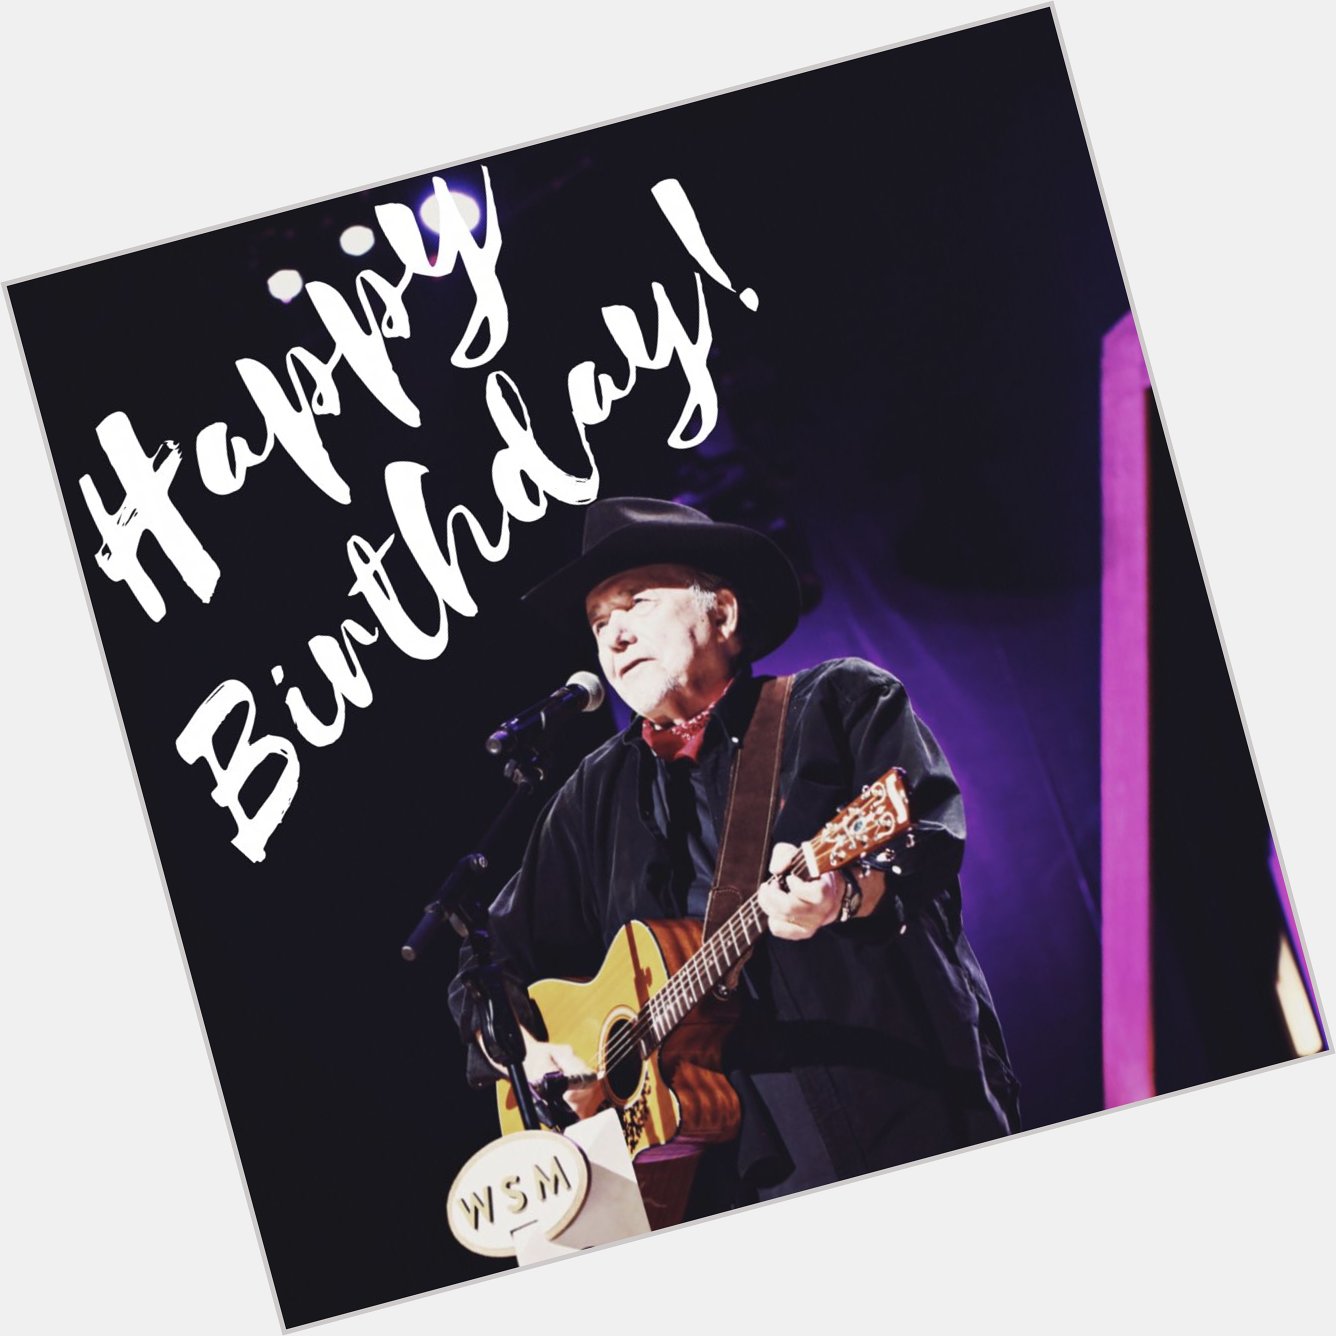 Happy 83rd Birthday Bobby Bare! See you tonight at the Opry! - Your Team
.   